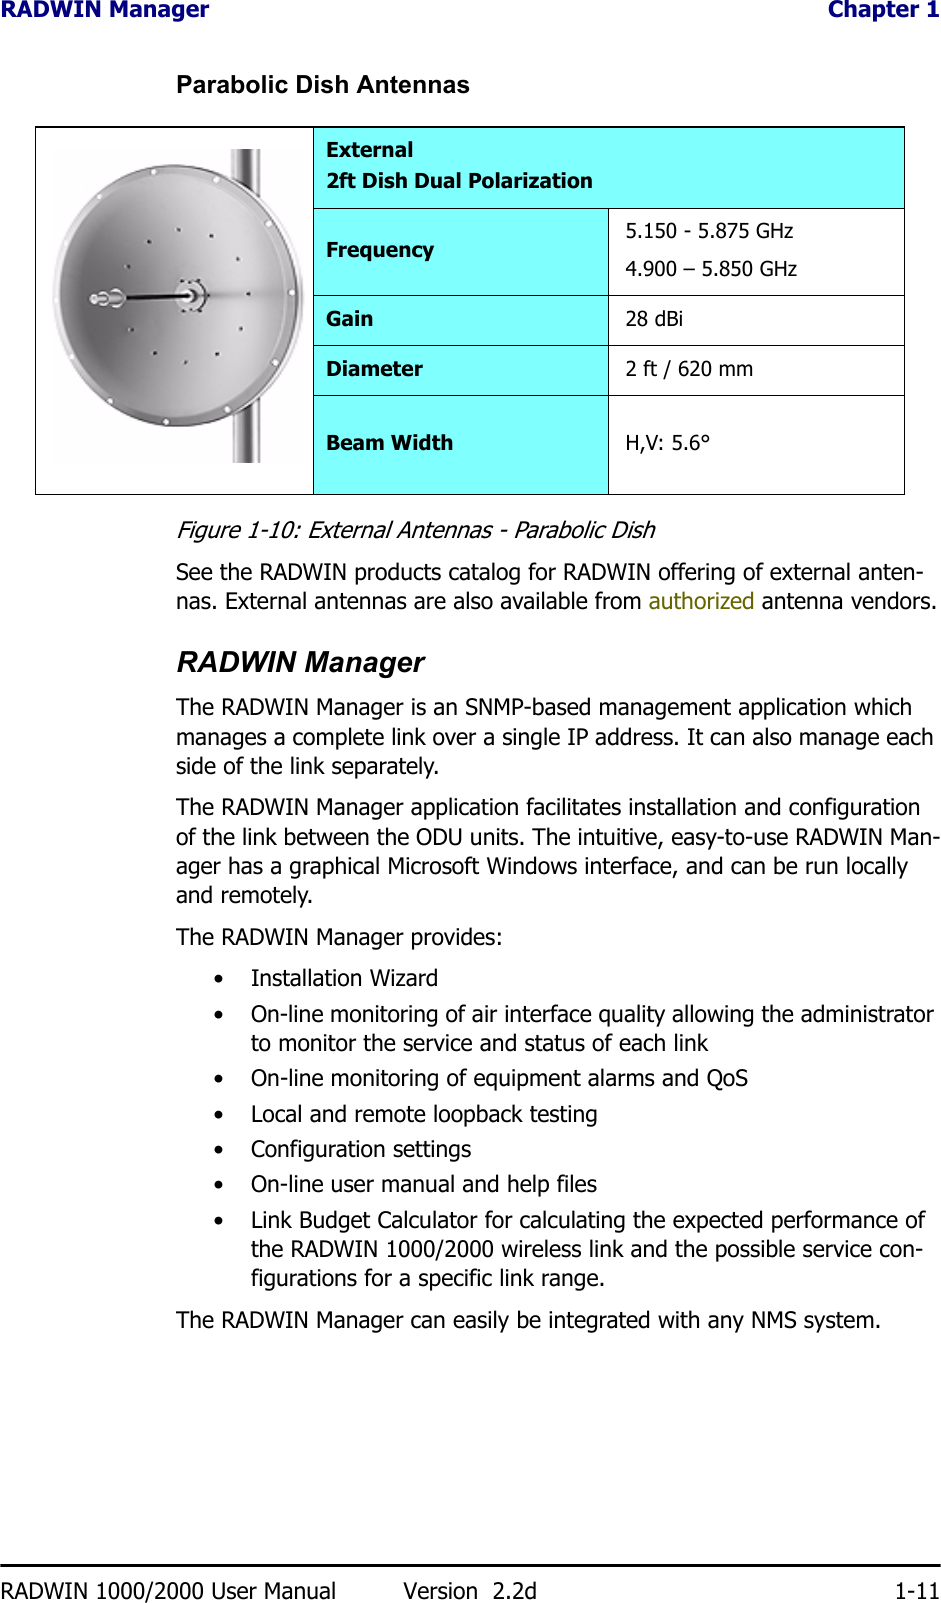 RADWIN Manager  Chapter 1RADWIN 1000/2000 User Manual Version  2.2d 1-11Parabolic Dish AntennasFigure 1-10: External Antennas - Parabolic DishSee the RADWIN products catalog for RADWIN offering of external anten-nas. External antennas are also available from authorized antenna vendors.RADWIN ManagerThe RADWIN Manager is an SNMP-based management application which manages a complete link over a single IP address. It can also manage each side of the link separately.The RADWIN Manager application facilitates installation and configuration of the link between the ODU units. The intuitive, easy-to-use RADWIN Man-ager has a graphical Microsoft Windows interface, and can be run locally and remotely. The RADWIN Manager provides:• Installation Wizard• On-line monitoring of air interface quality allowing the administrator to monitor the service and status of each link• On-line monitoring of equipment alarms and QoS• Local and remote loopback testing• Configuration settings• On-line user manual and help files• Link Budget Calculator for calculating the expected performance of the RADWIN 1000/2000 wireless link and the possible service con-figurations for a specific link range.The RADWIN Manager can easily be integrated with any NMS system.External2ft Dish Dual PolarizationFrequency 5.150 - 5.875 GHz4.900 – 5.850 GHzGain 28 dBiDiameter 2 ft / 620 mmBeam Width H,V: 5.6°